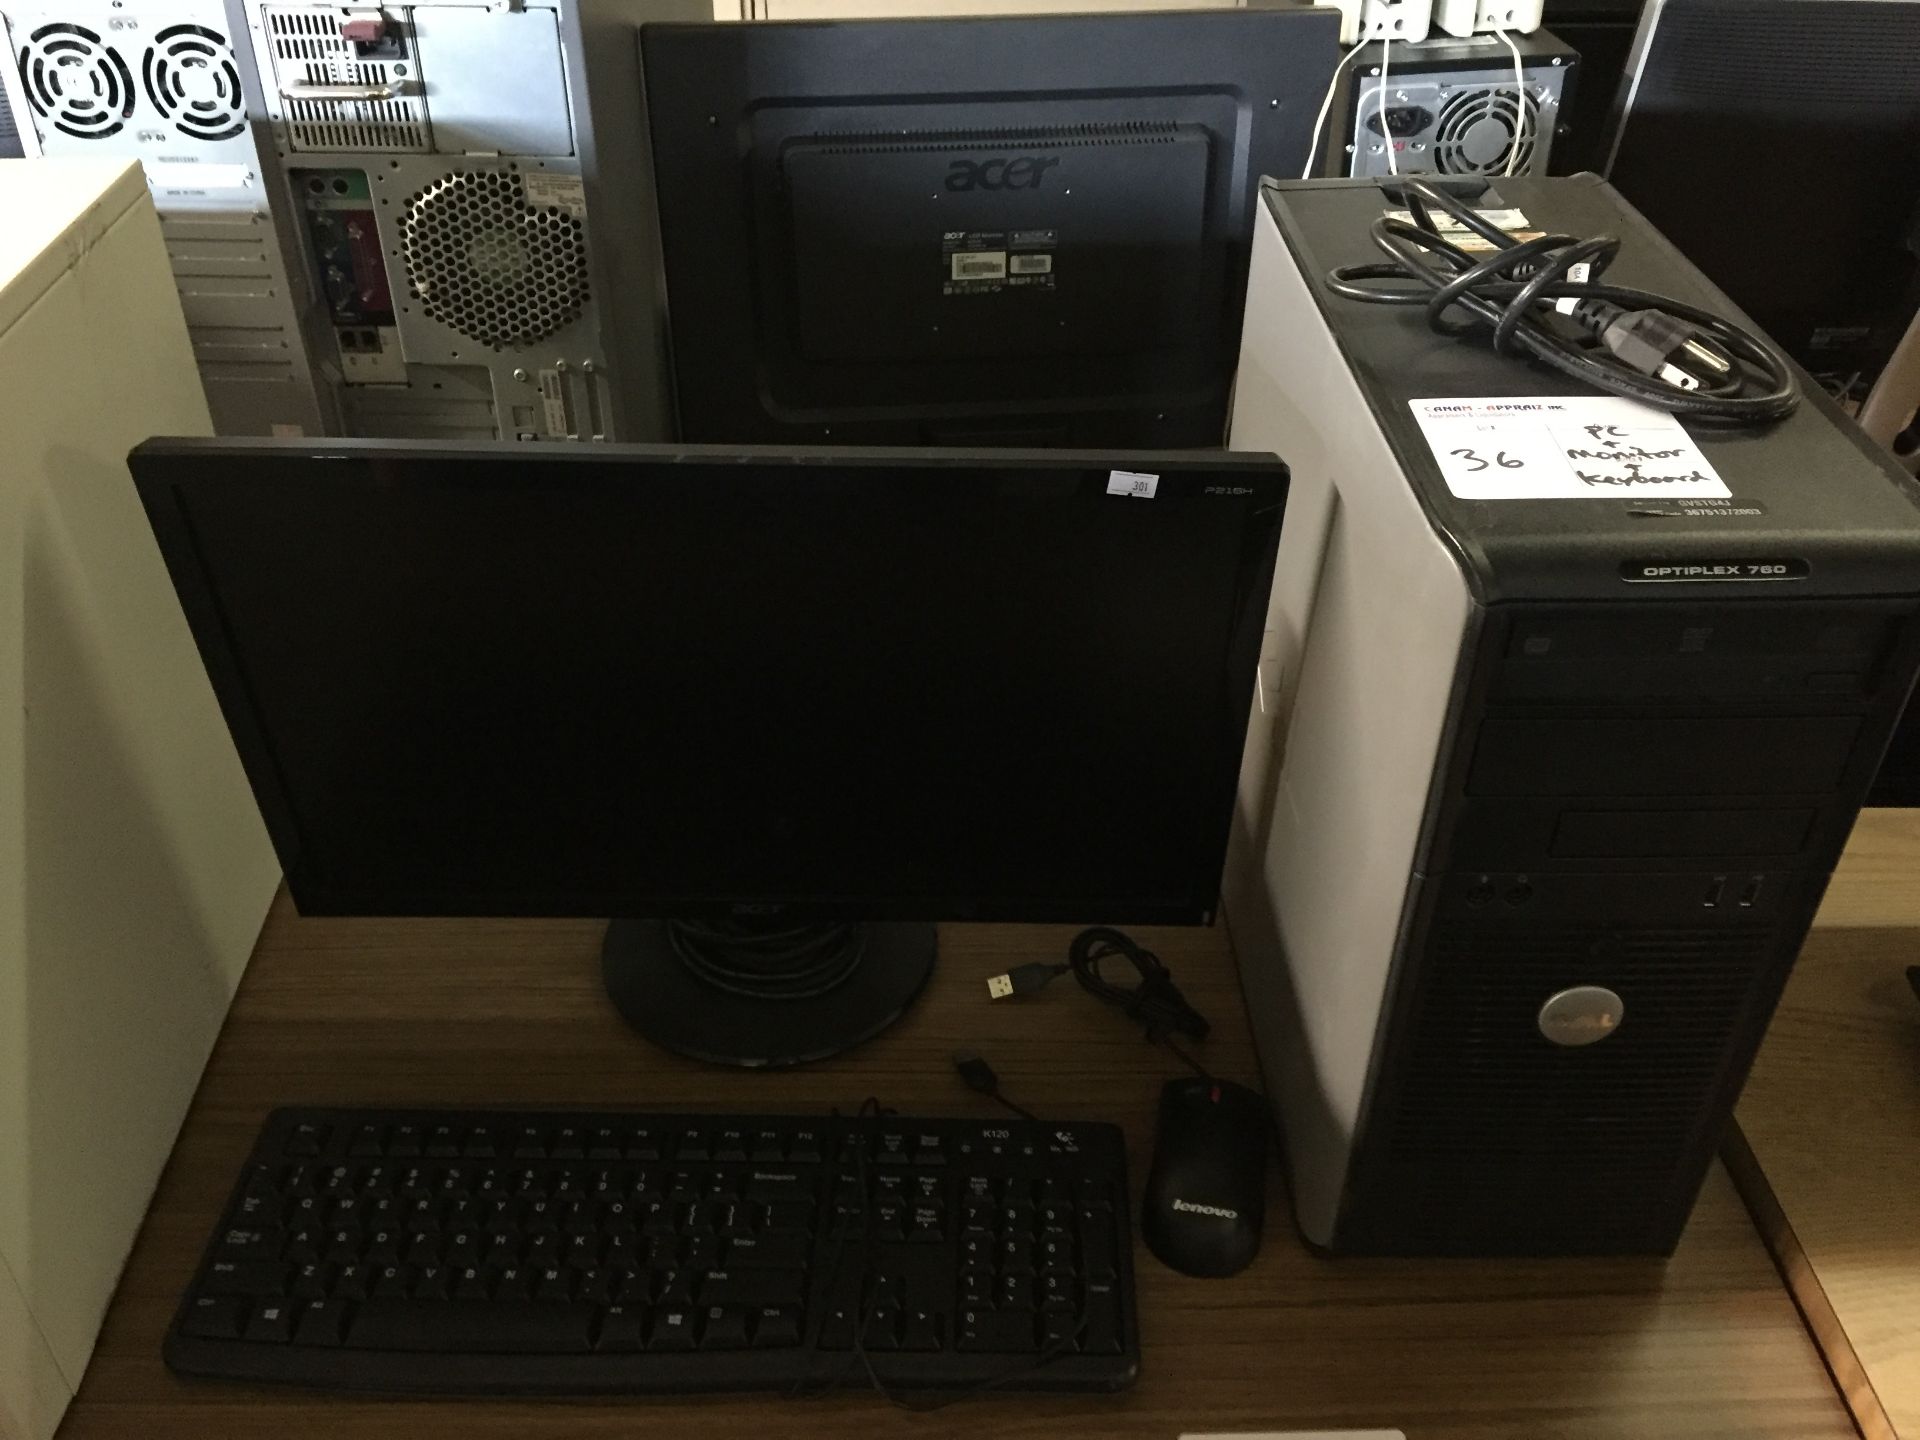 PC, MONITOR, KEYBOARD, MOUSE - 1PC, PC DELL OPTIFLEX 760 - 1PC, ACER MONITOR P216H 21.5" - 1PC